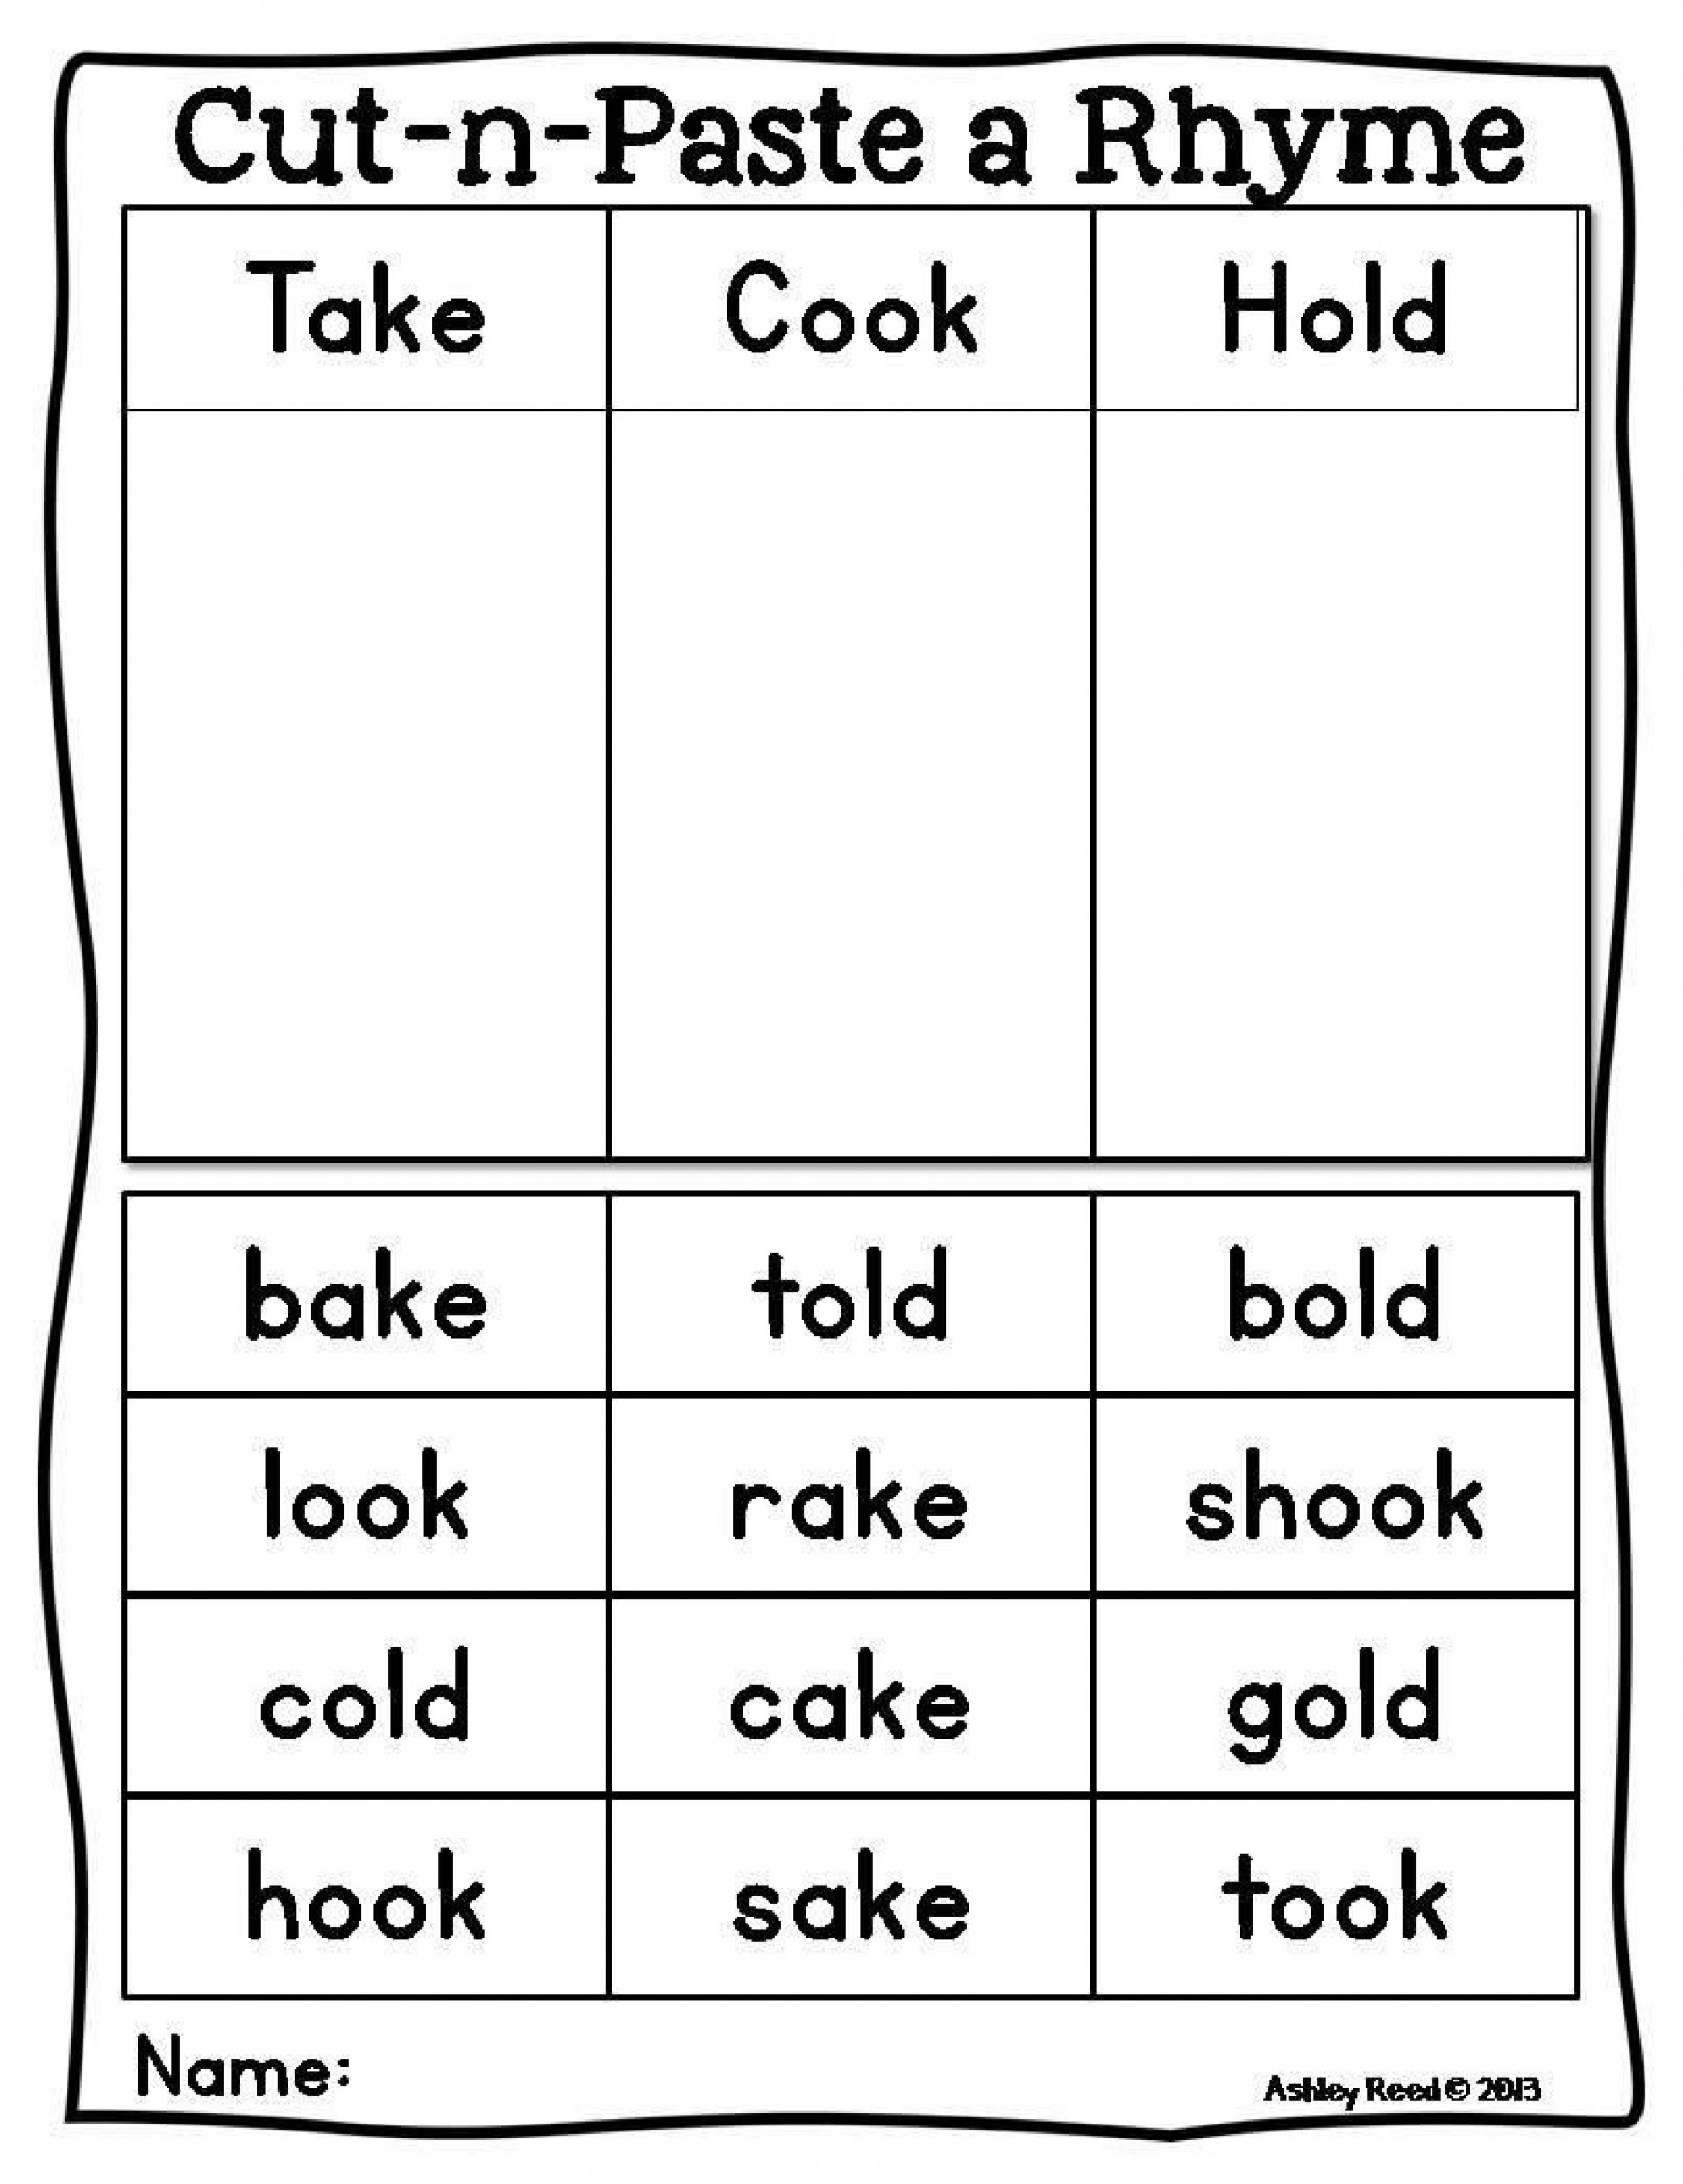 preschool-cut-and-paste-worksheets-about-preschool-cut-and-paste